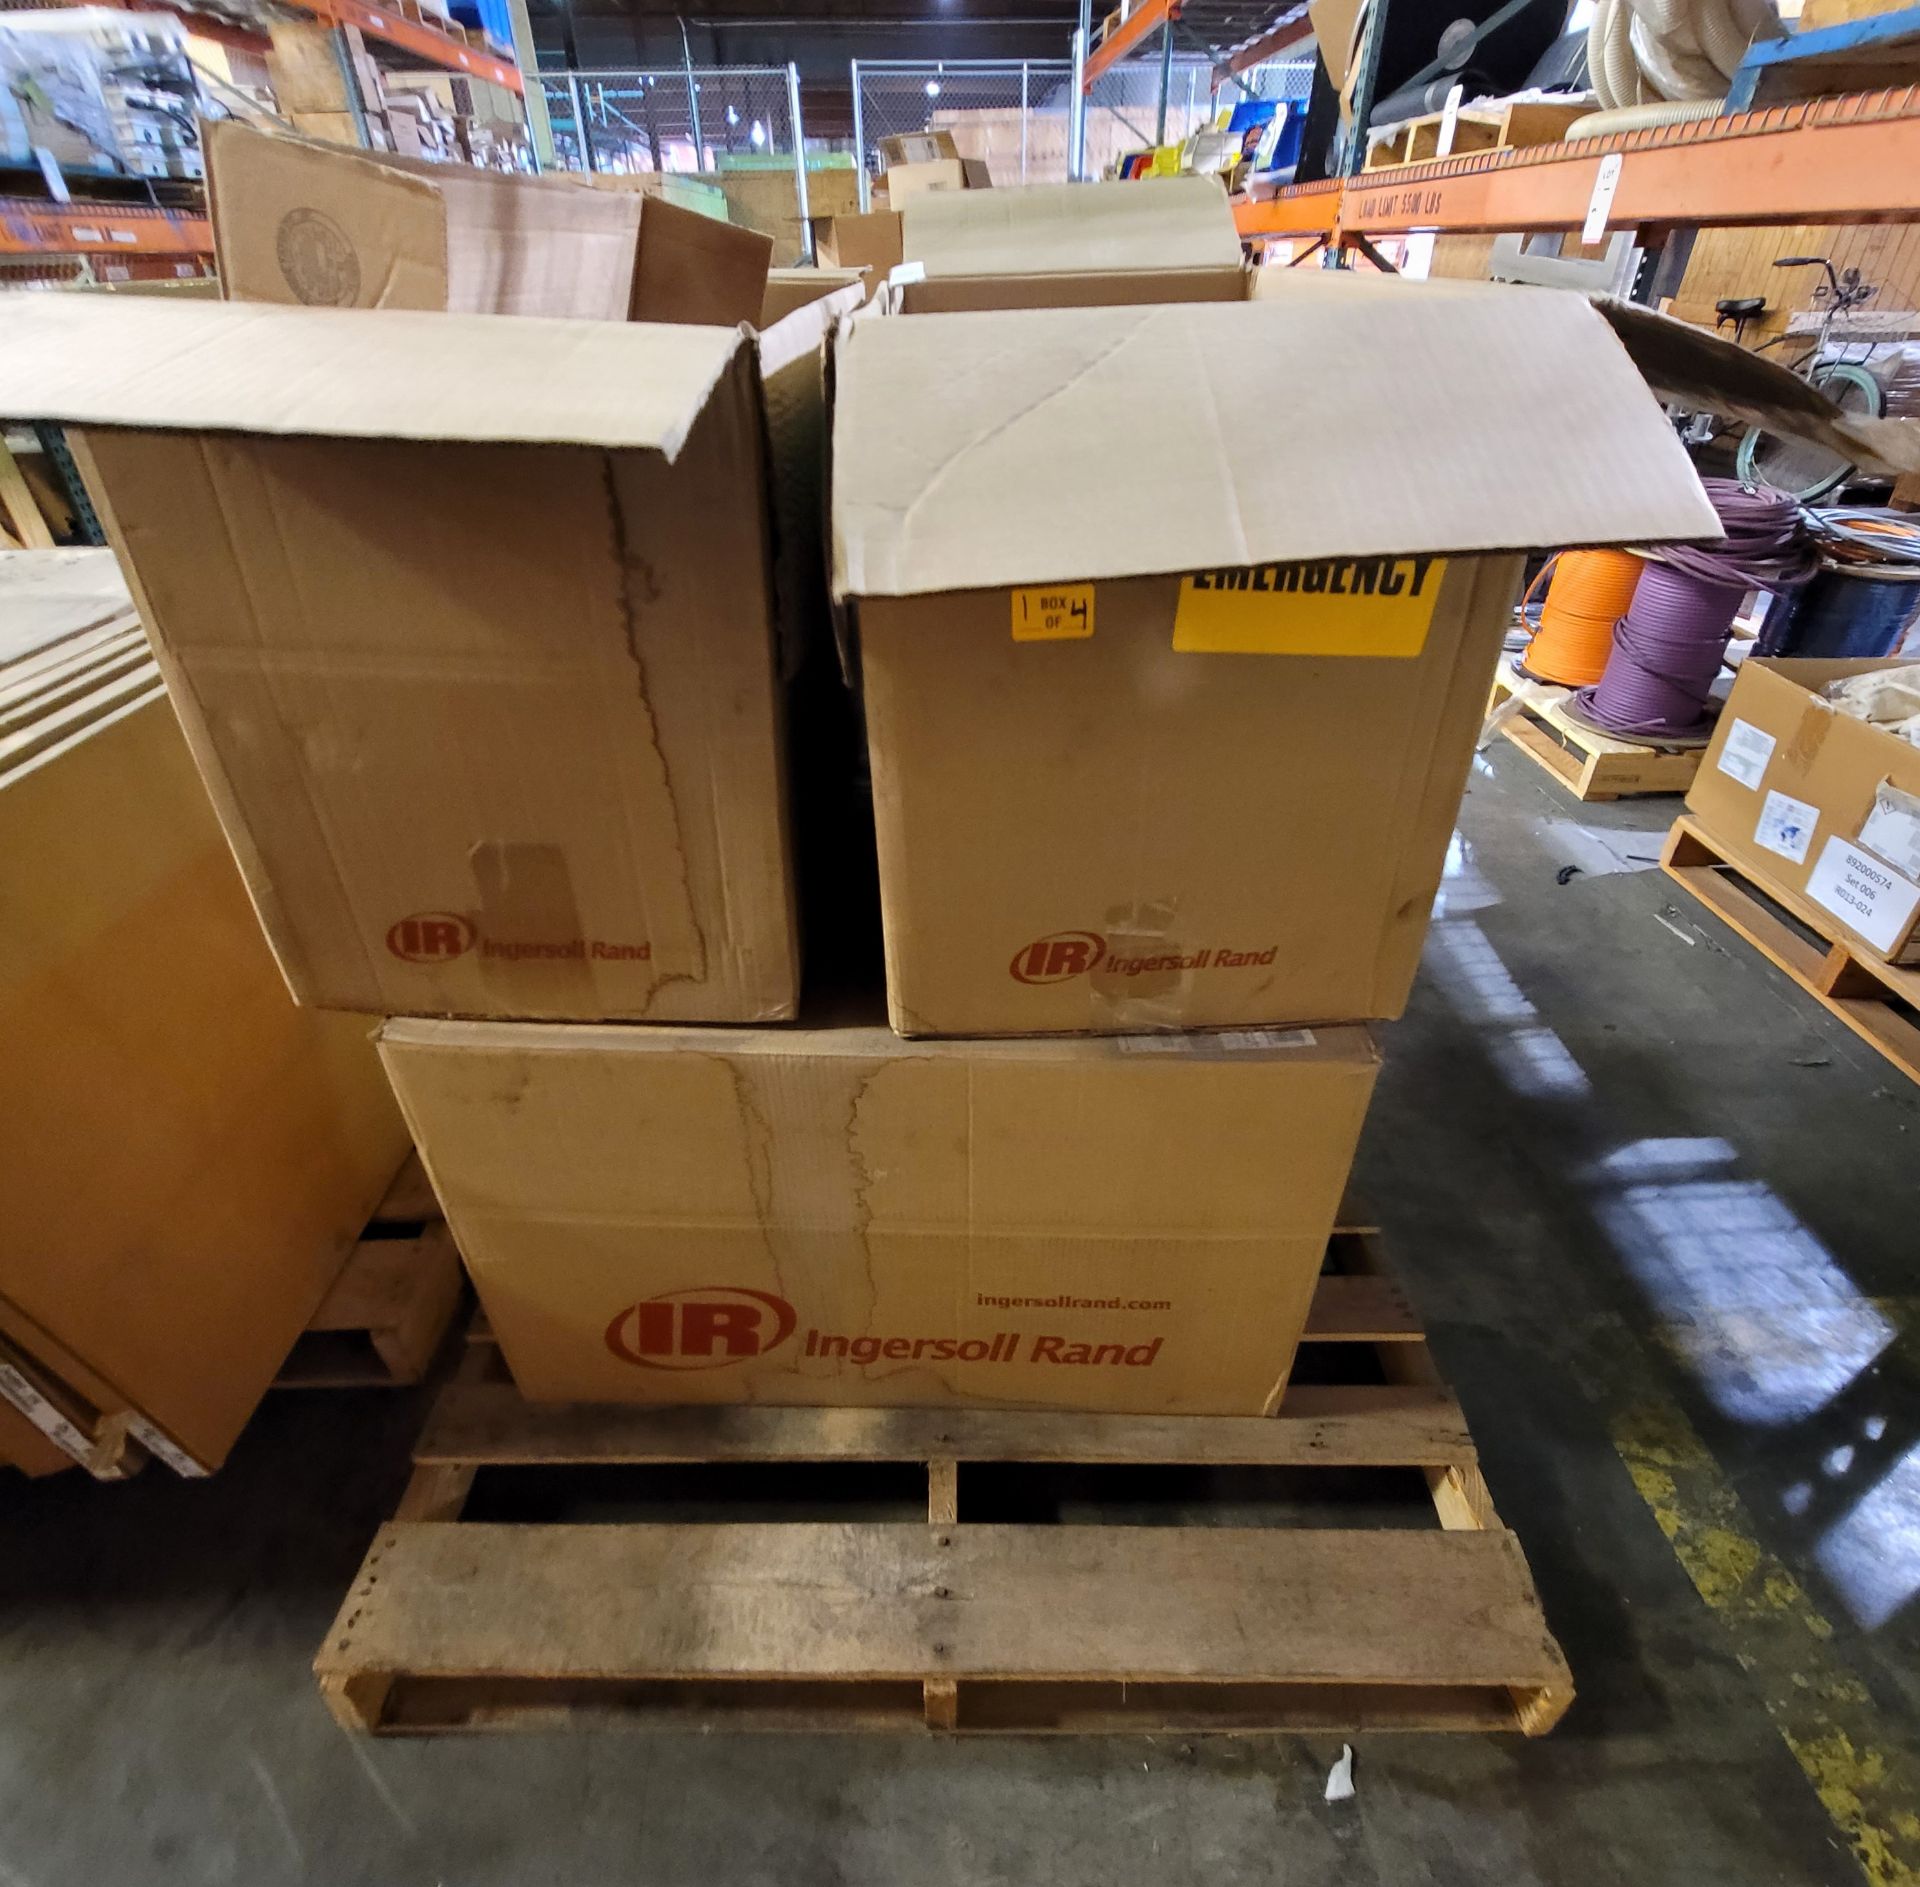 LOT - PALLET OF INGERSOLL-RAND FILTER ELEMENTS, MODEL NLM500, AND EDV-2000 ELECTRIC CONDENSATE